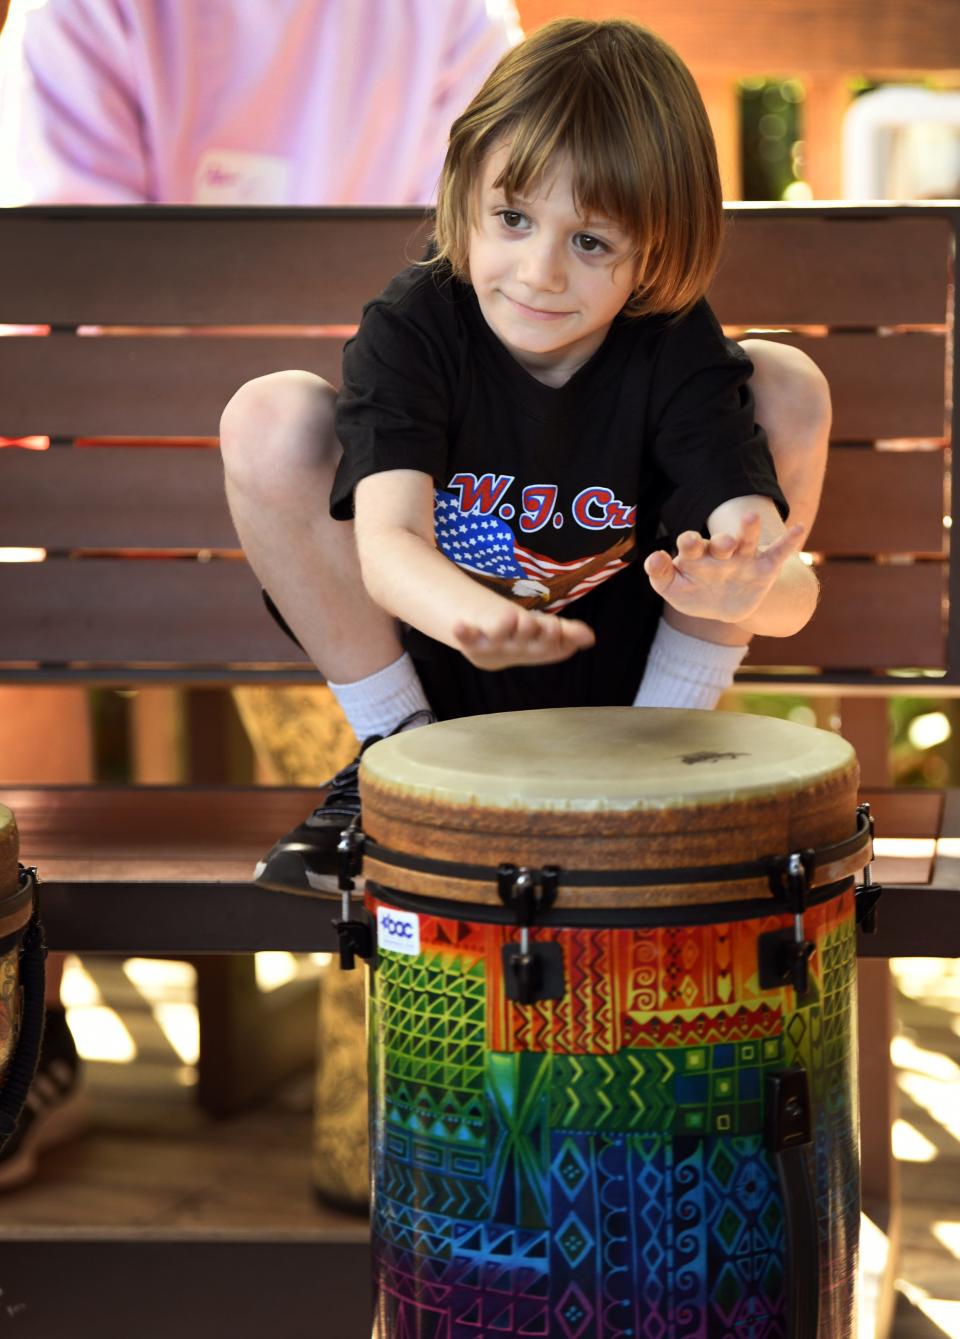 William, a student of W.J. Creel Elementary in Melbourne, tries out the drums under the instruction of Charles Baumgartner at the BAC (Brevard Achievement Center) 39th annual Color in Motion Art Festival at Brevard Zoo this past week.
(Credit: TIM SHORTT/ FLORIDA TODAY)